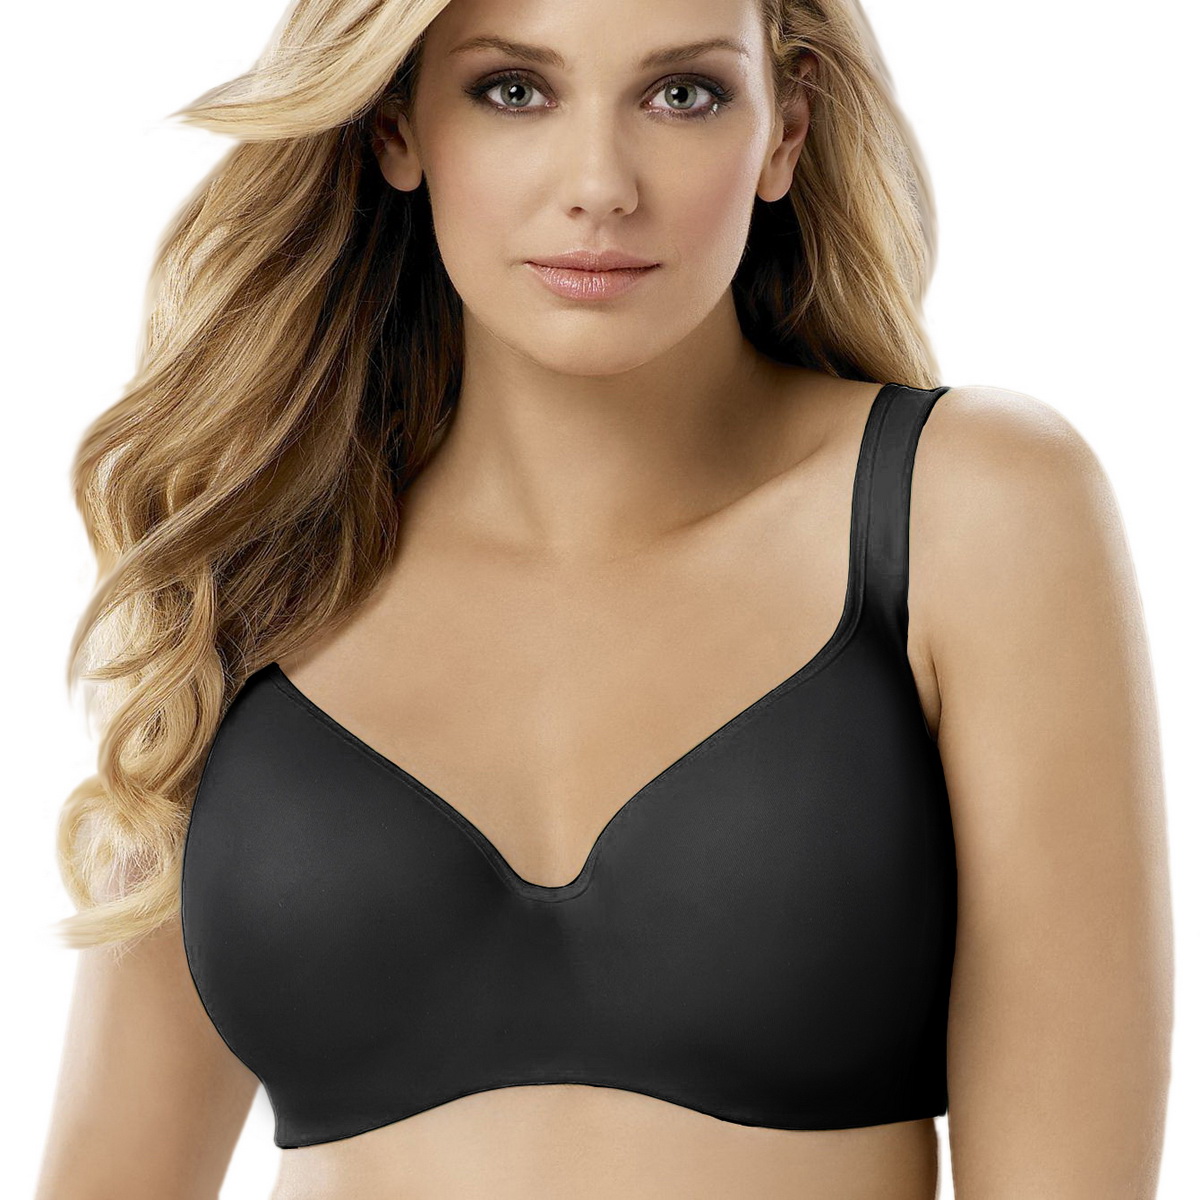 Fashion-professional-plus-size-bra-invisible-seamless-underwear-full-cup-large-cup-glossy-thin-cup-bra.jpg (1200×1200)